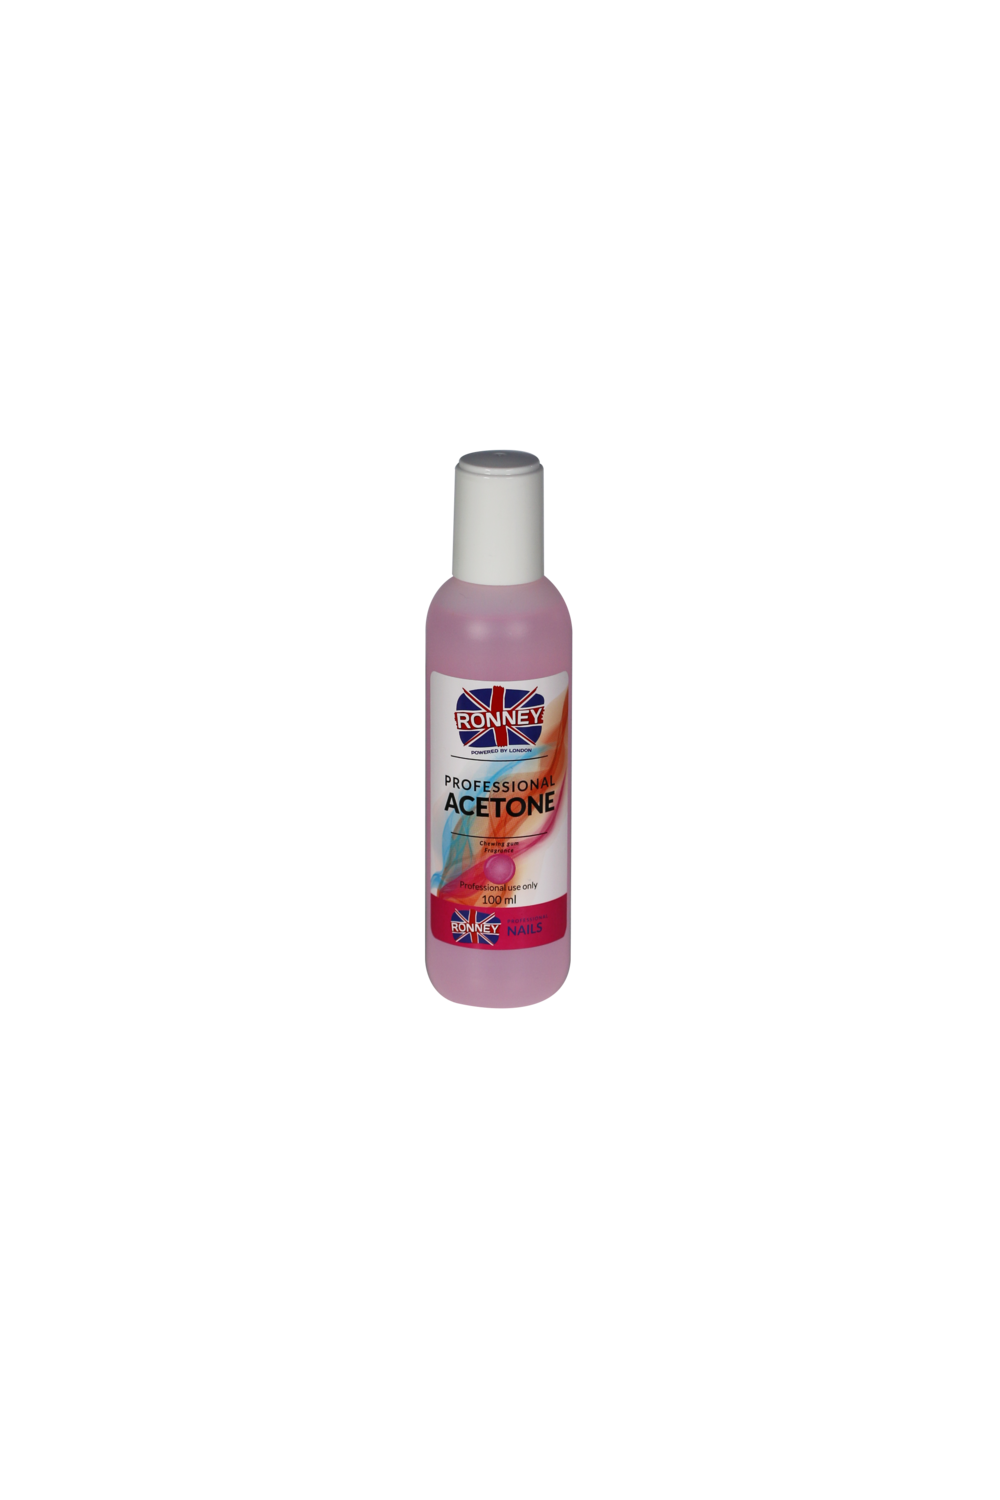 RONNEY Professional Acetone Chewing Gum Fragrance 100 ml